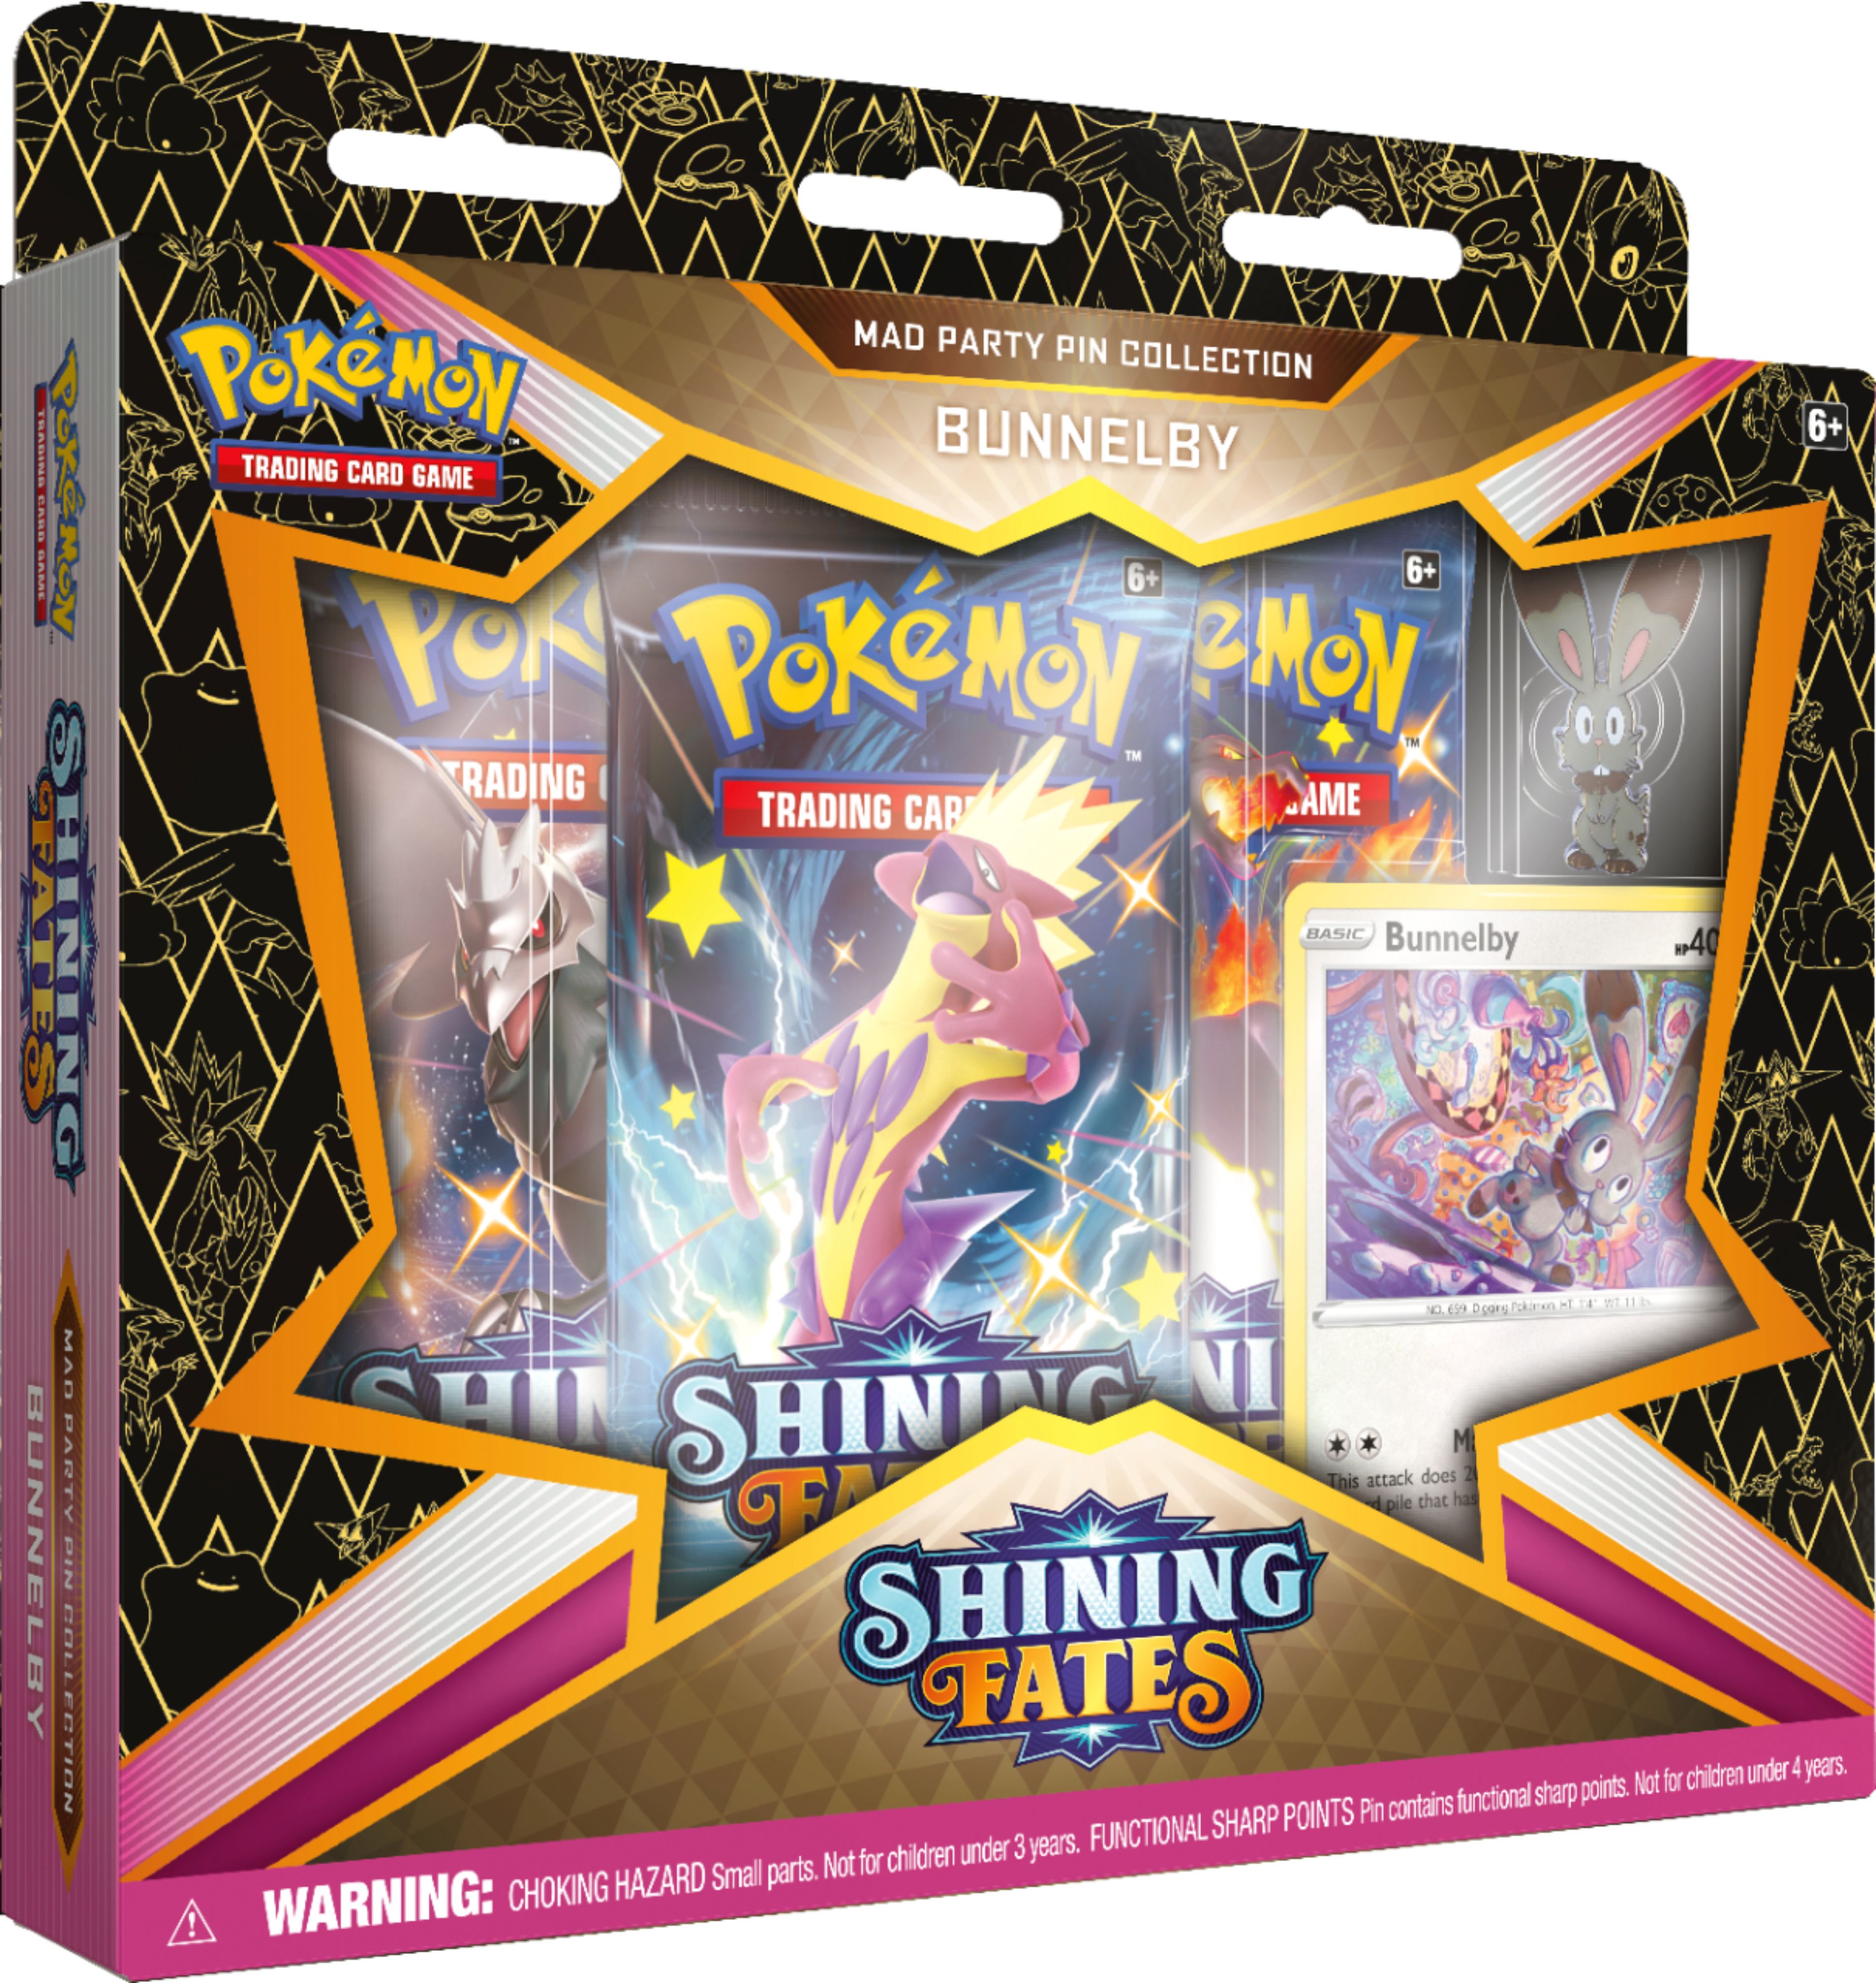 DIGITAL DELIVERY SHINING FATES POKEMON TCG ONLINE CODE CARDS